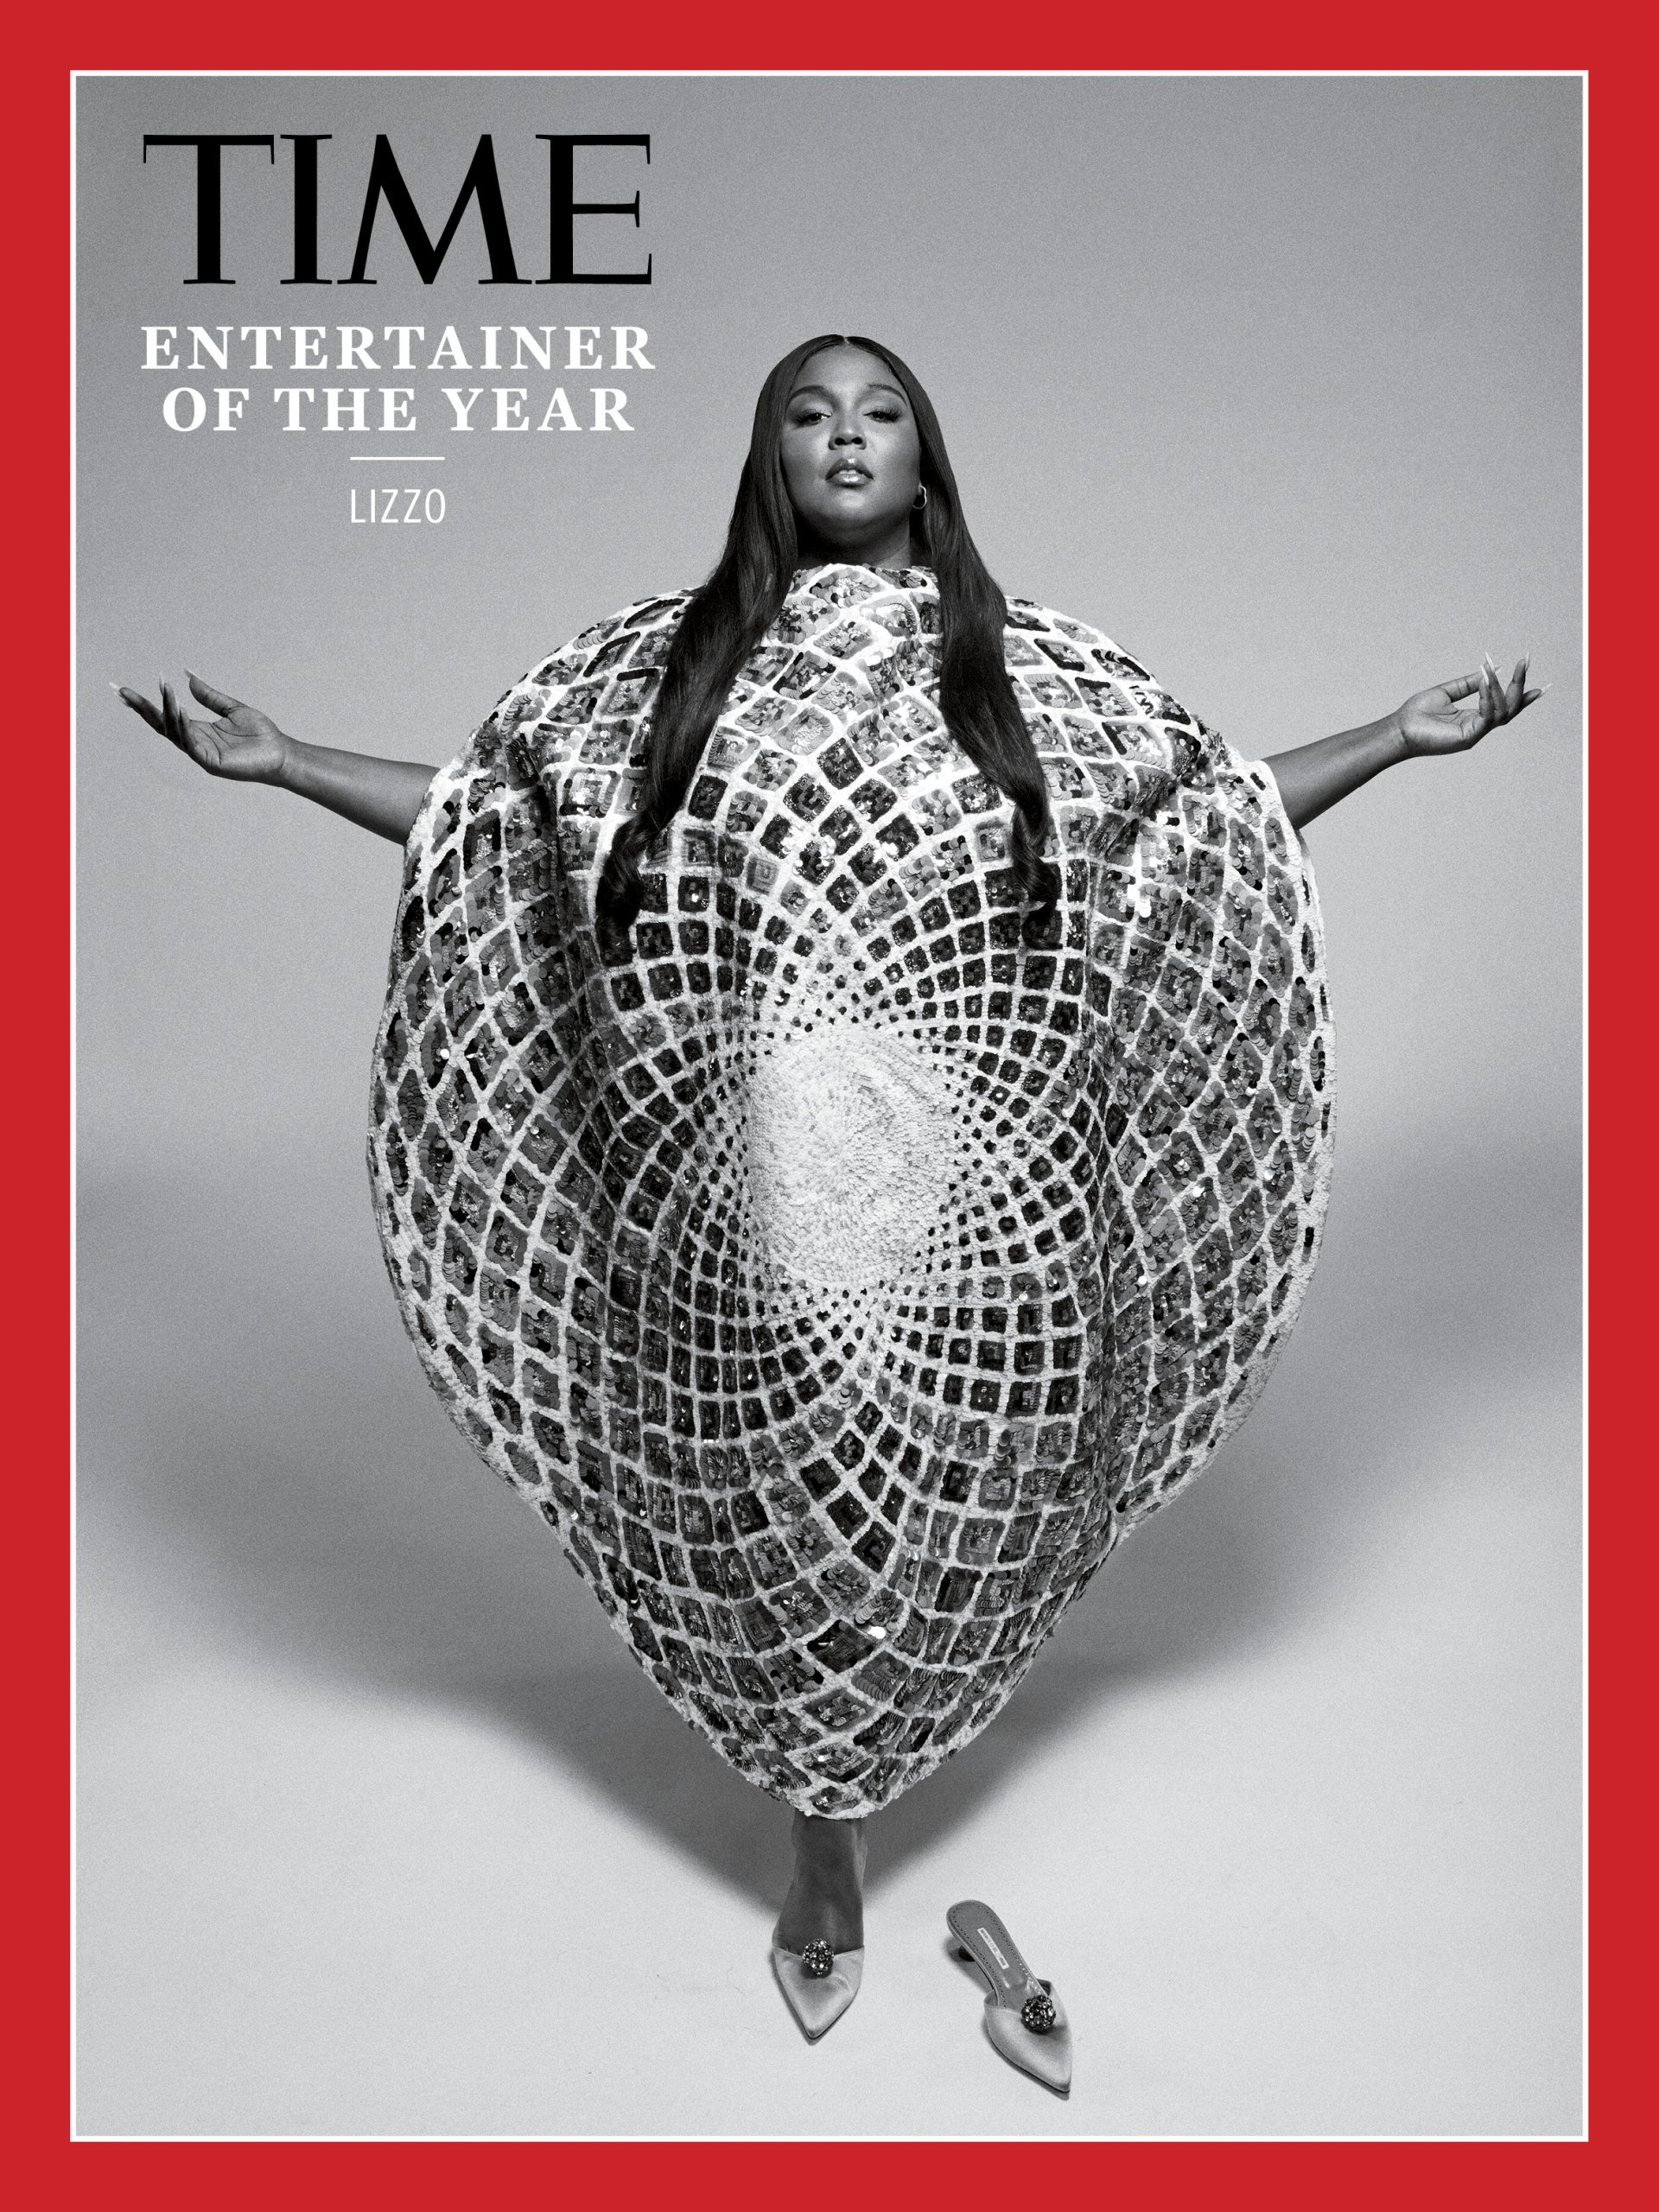 Lizzo is Time's entertainer of the year